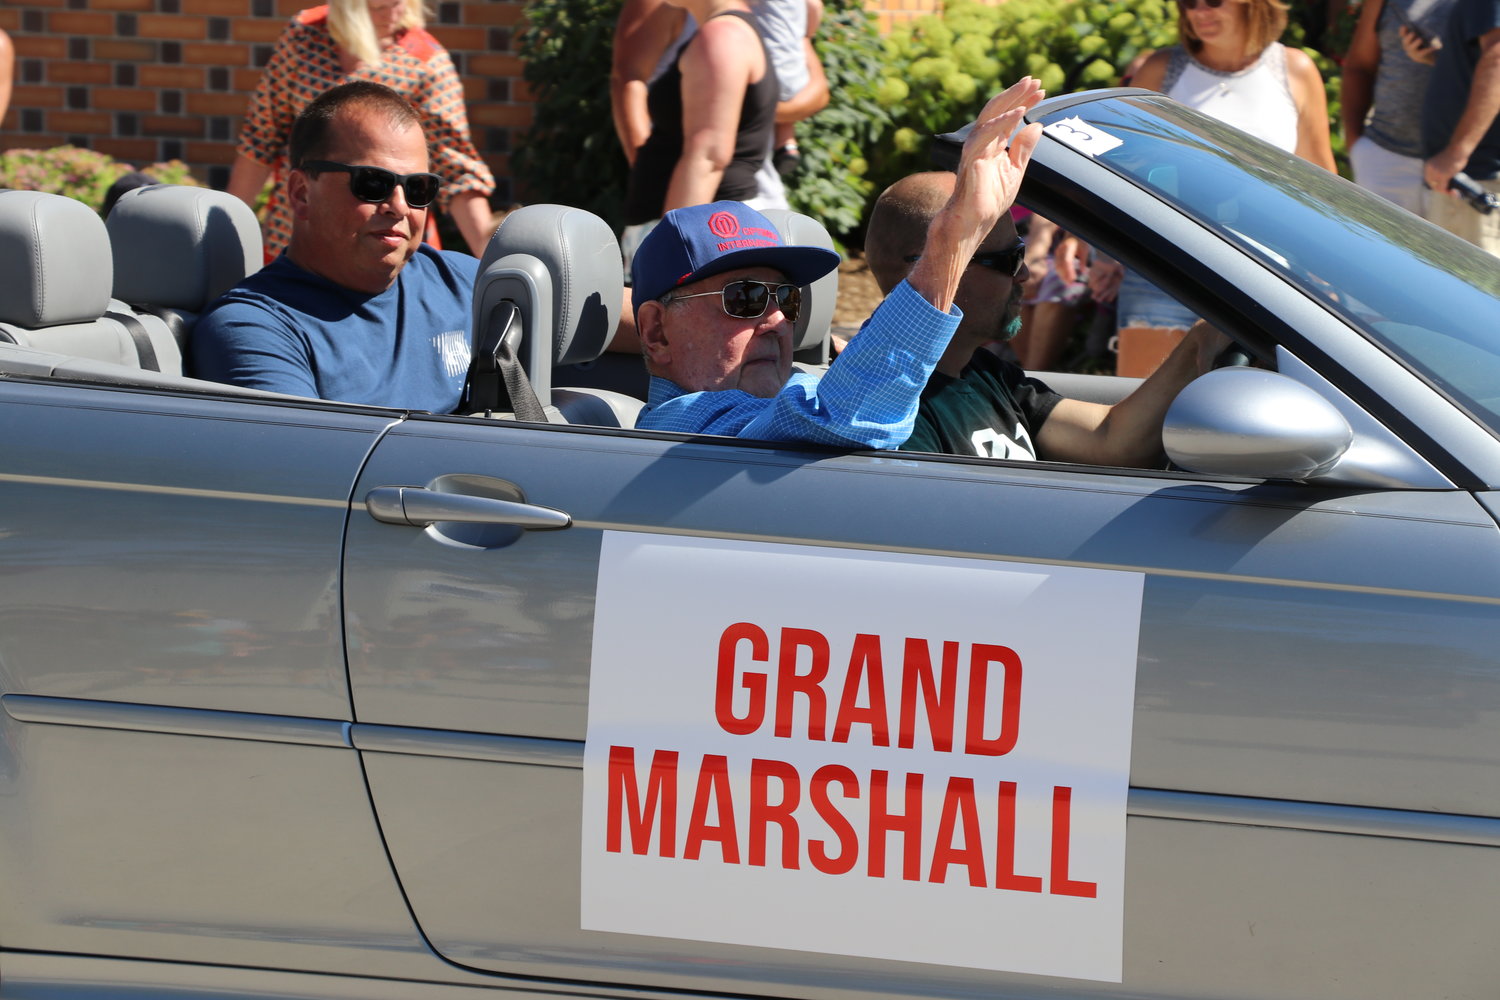 This year’s Grand Marshals for the Kalona Days Parade are father/son duo Ed and Clair Yoder.